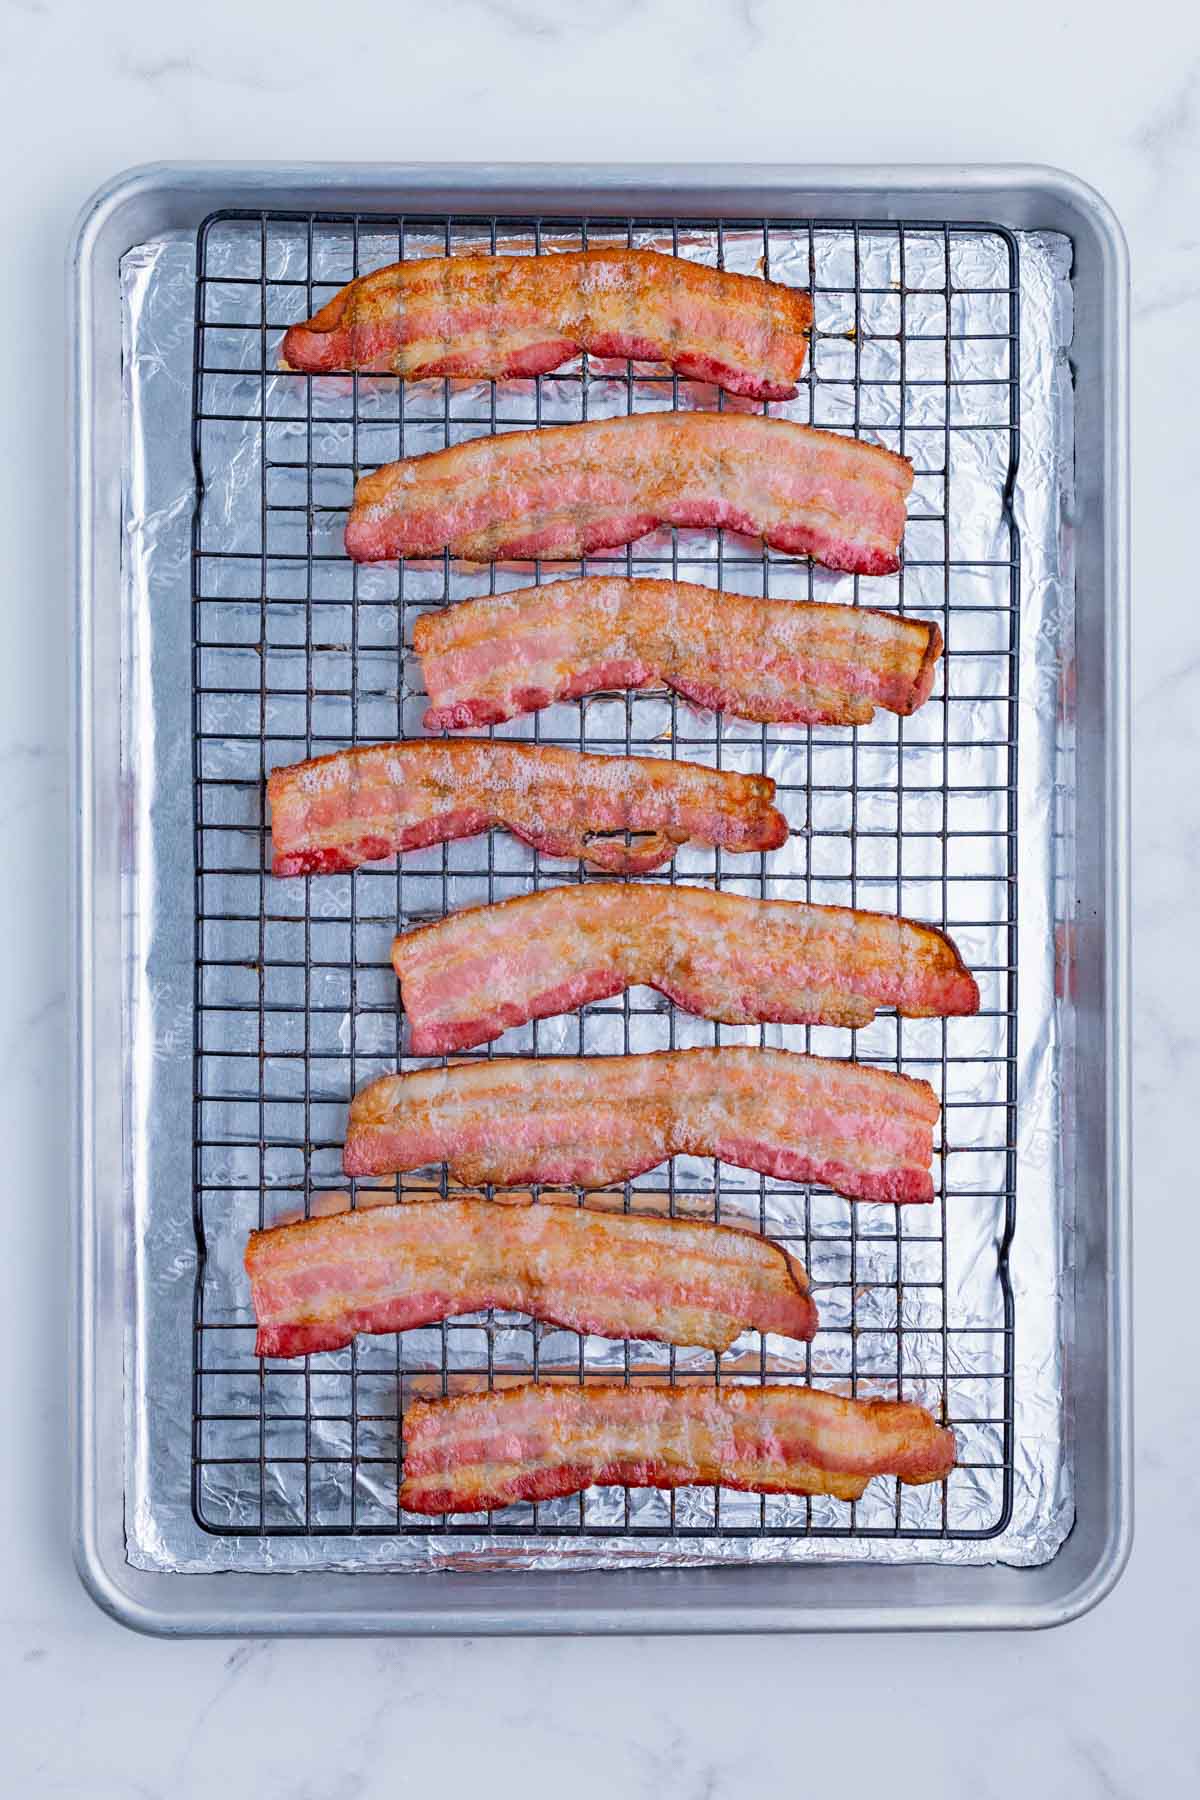 Bacon is cooked on a baking sheet with a wire rack to turn out crispy.